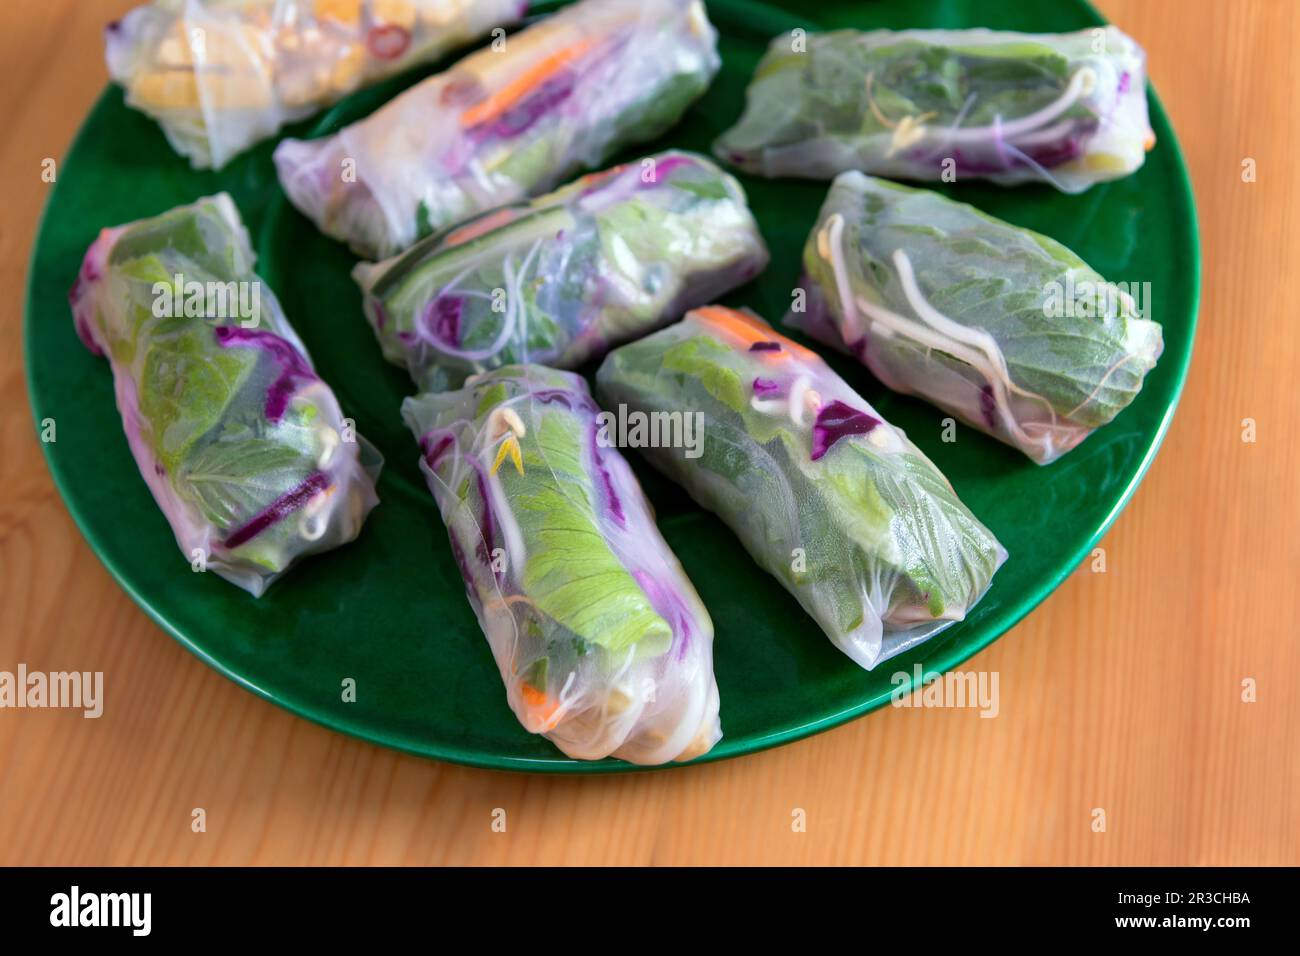 Fresh Spring Rolls on large green plate, view from above. Raw vegan dish, Vietnamese appetizer or main course, colourful vegetables wrapped in rice pa Stock Photo